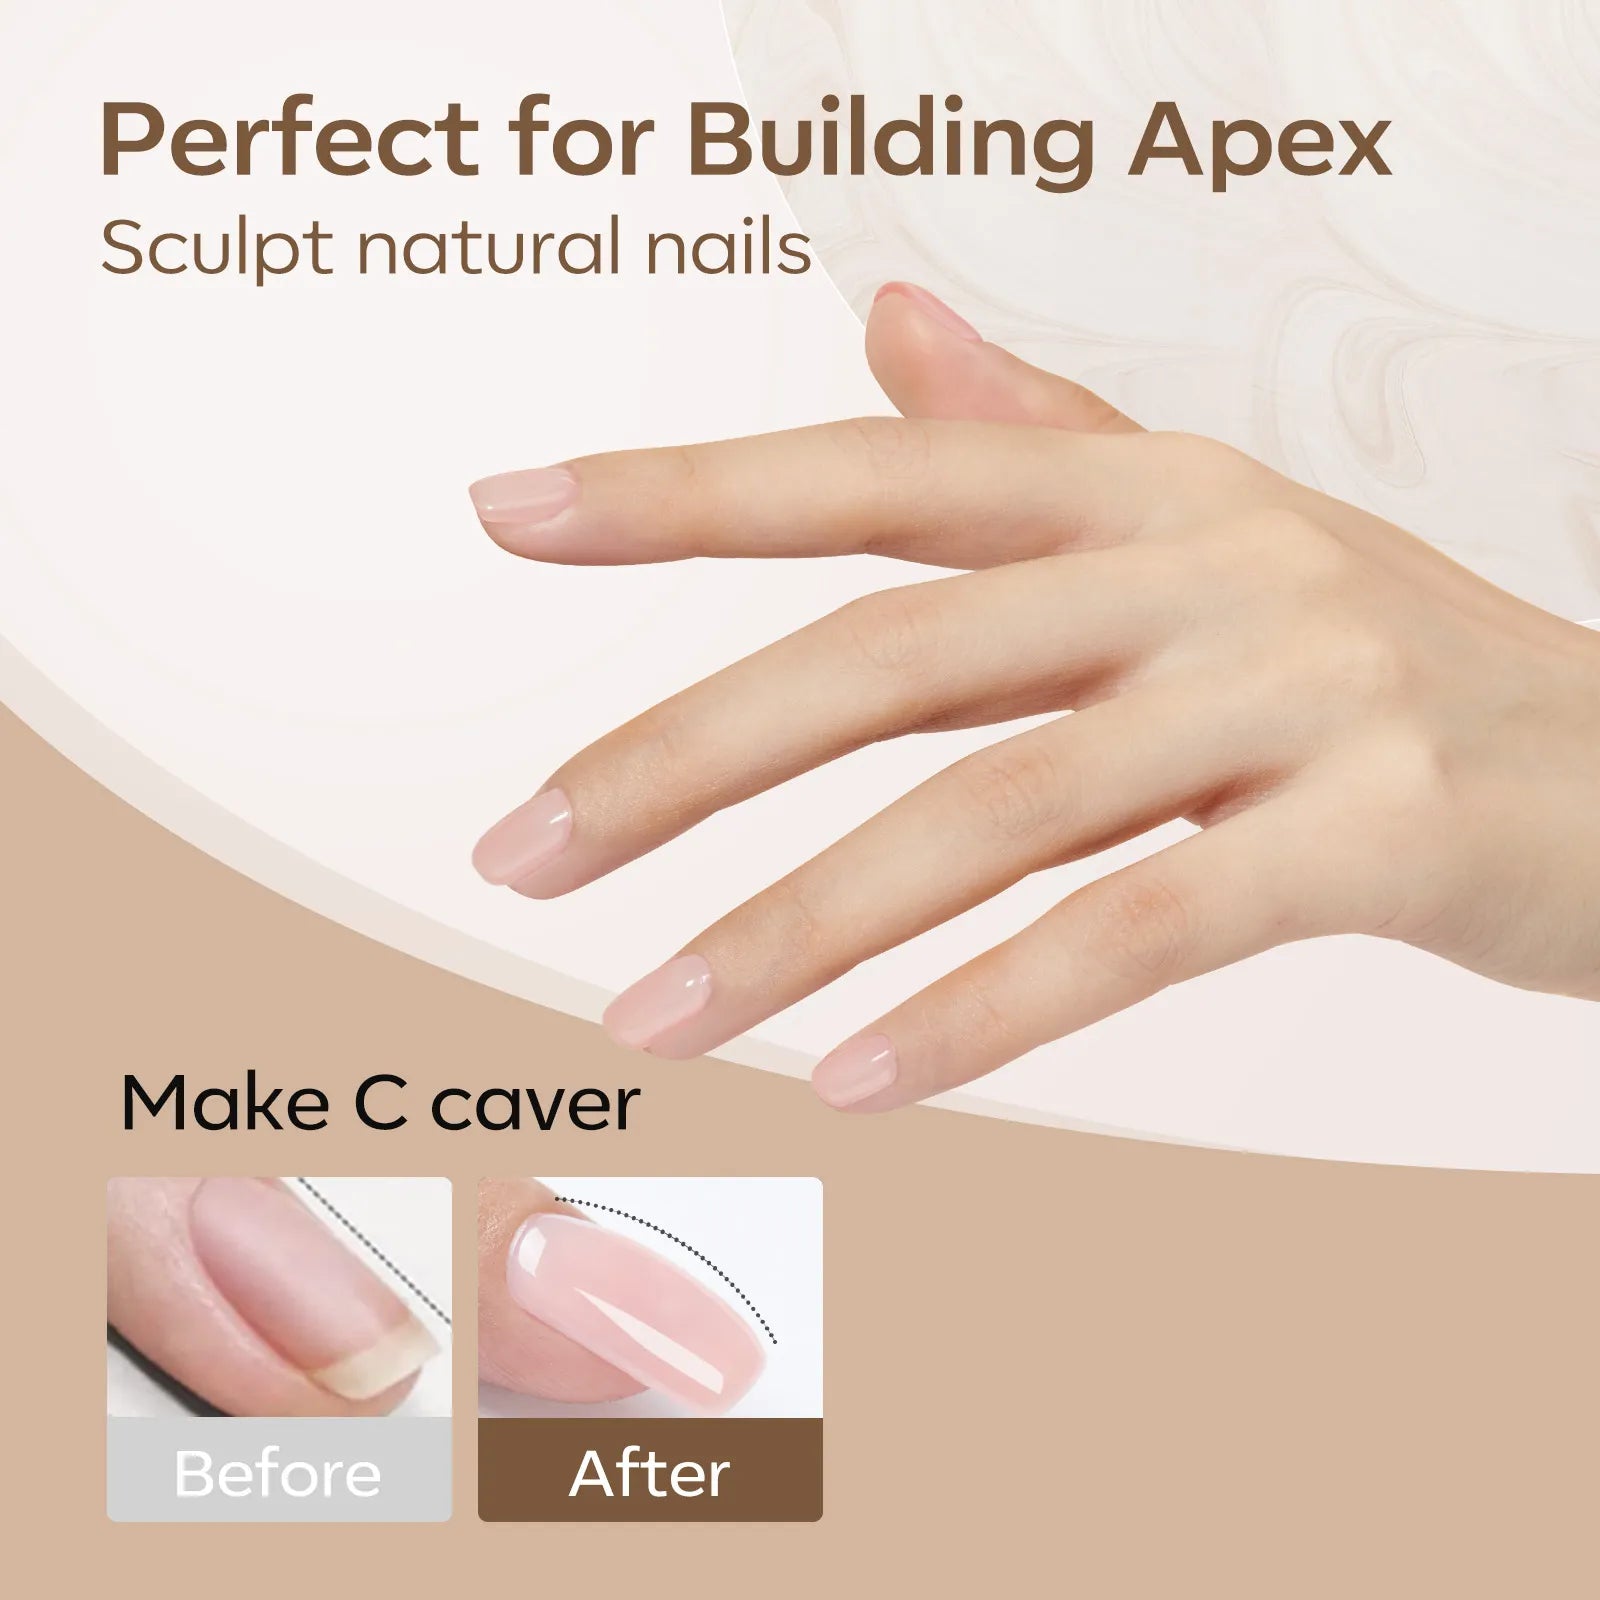 6 Differences Between Acrylic & Gel Nails